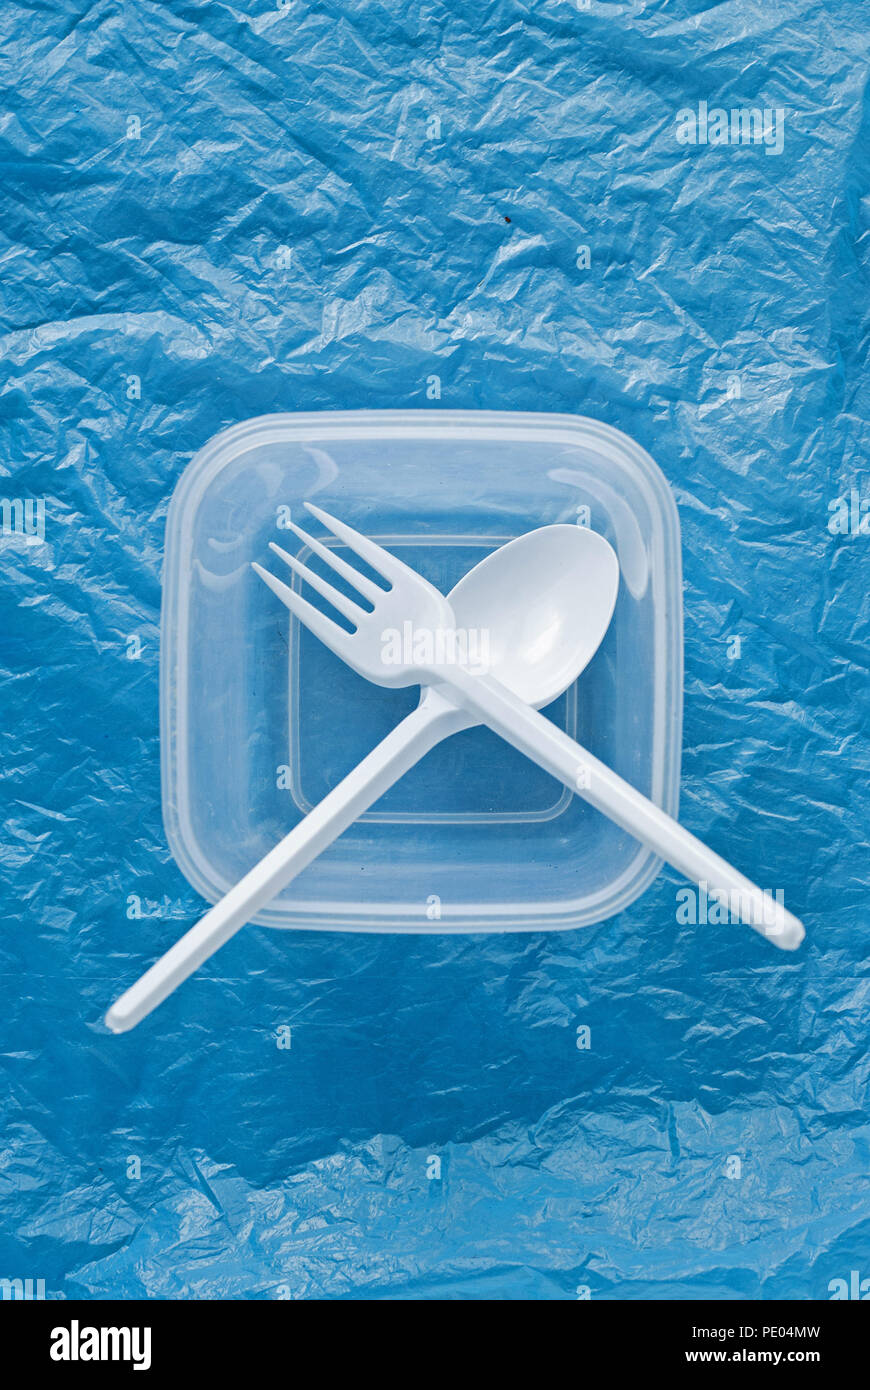 white plastic spoon and fork in a plastic container on a blue plastic bag Stock Photo